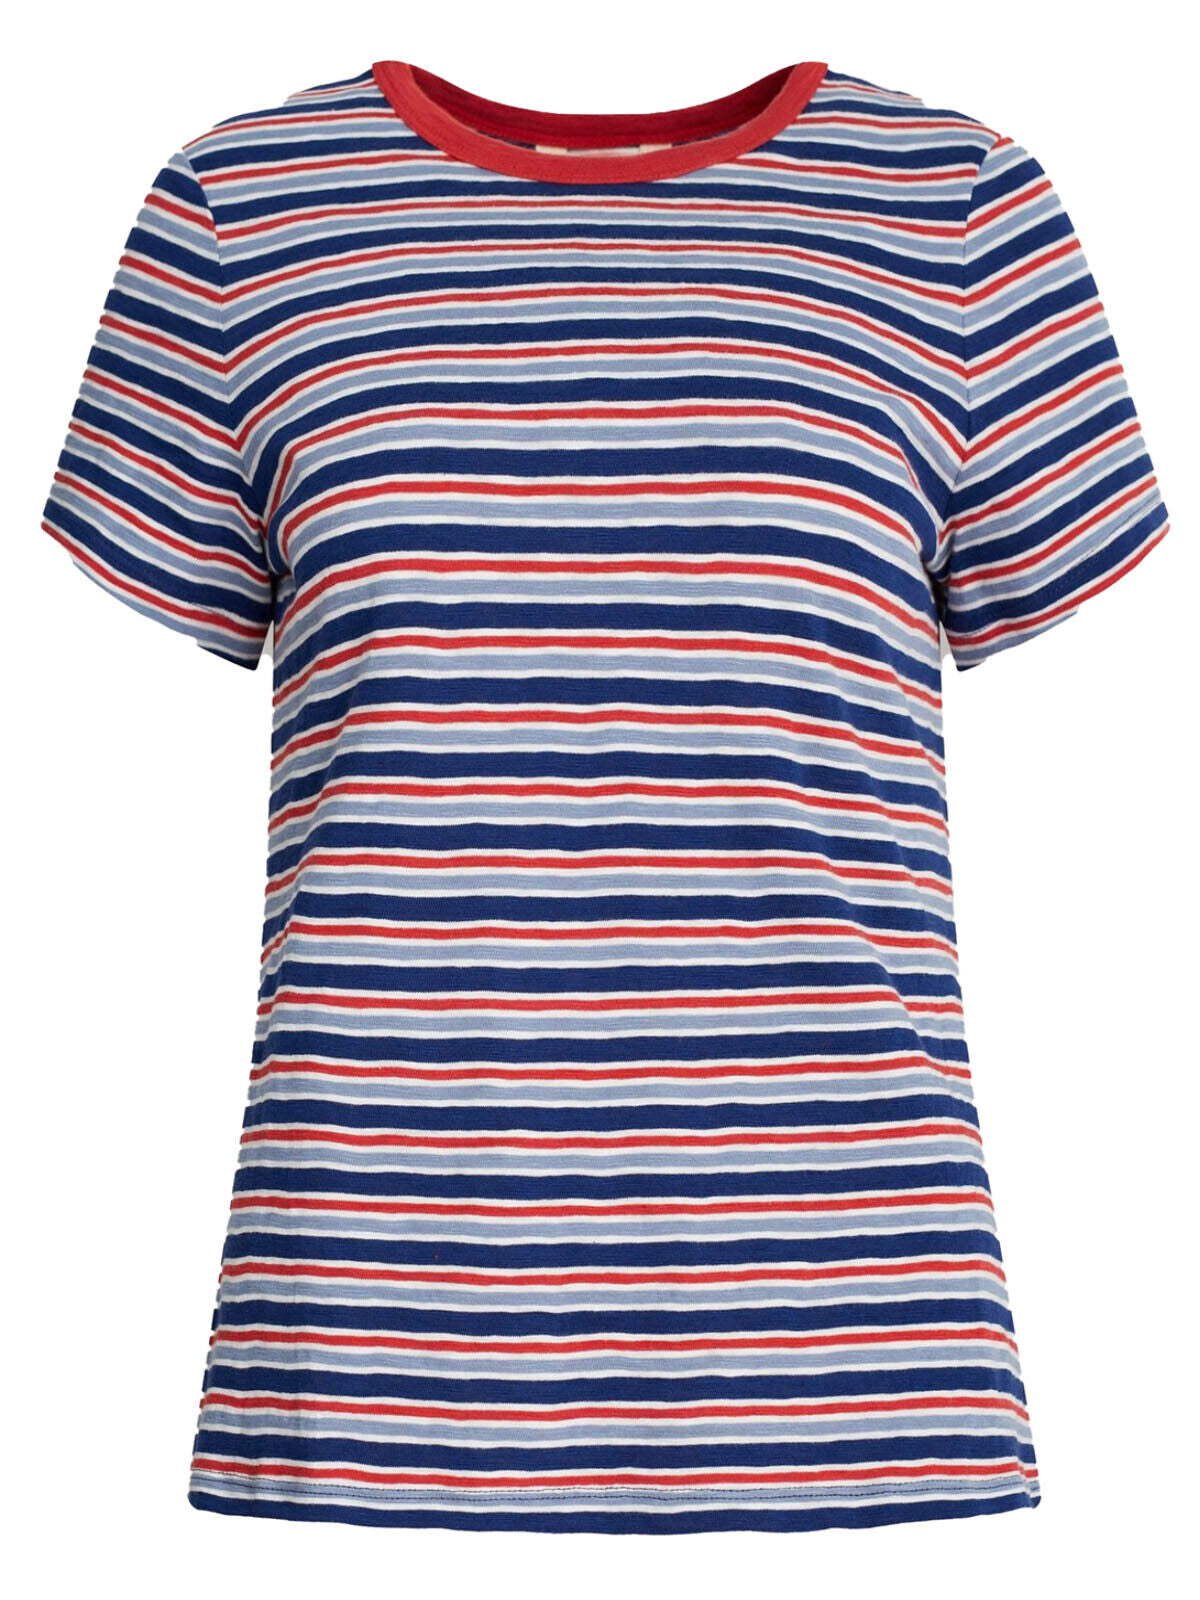 EX SEASALT Blue/Red Striped Reflection T-Shirt in Sizes 12, 14, 16, 18